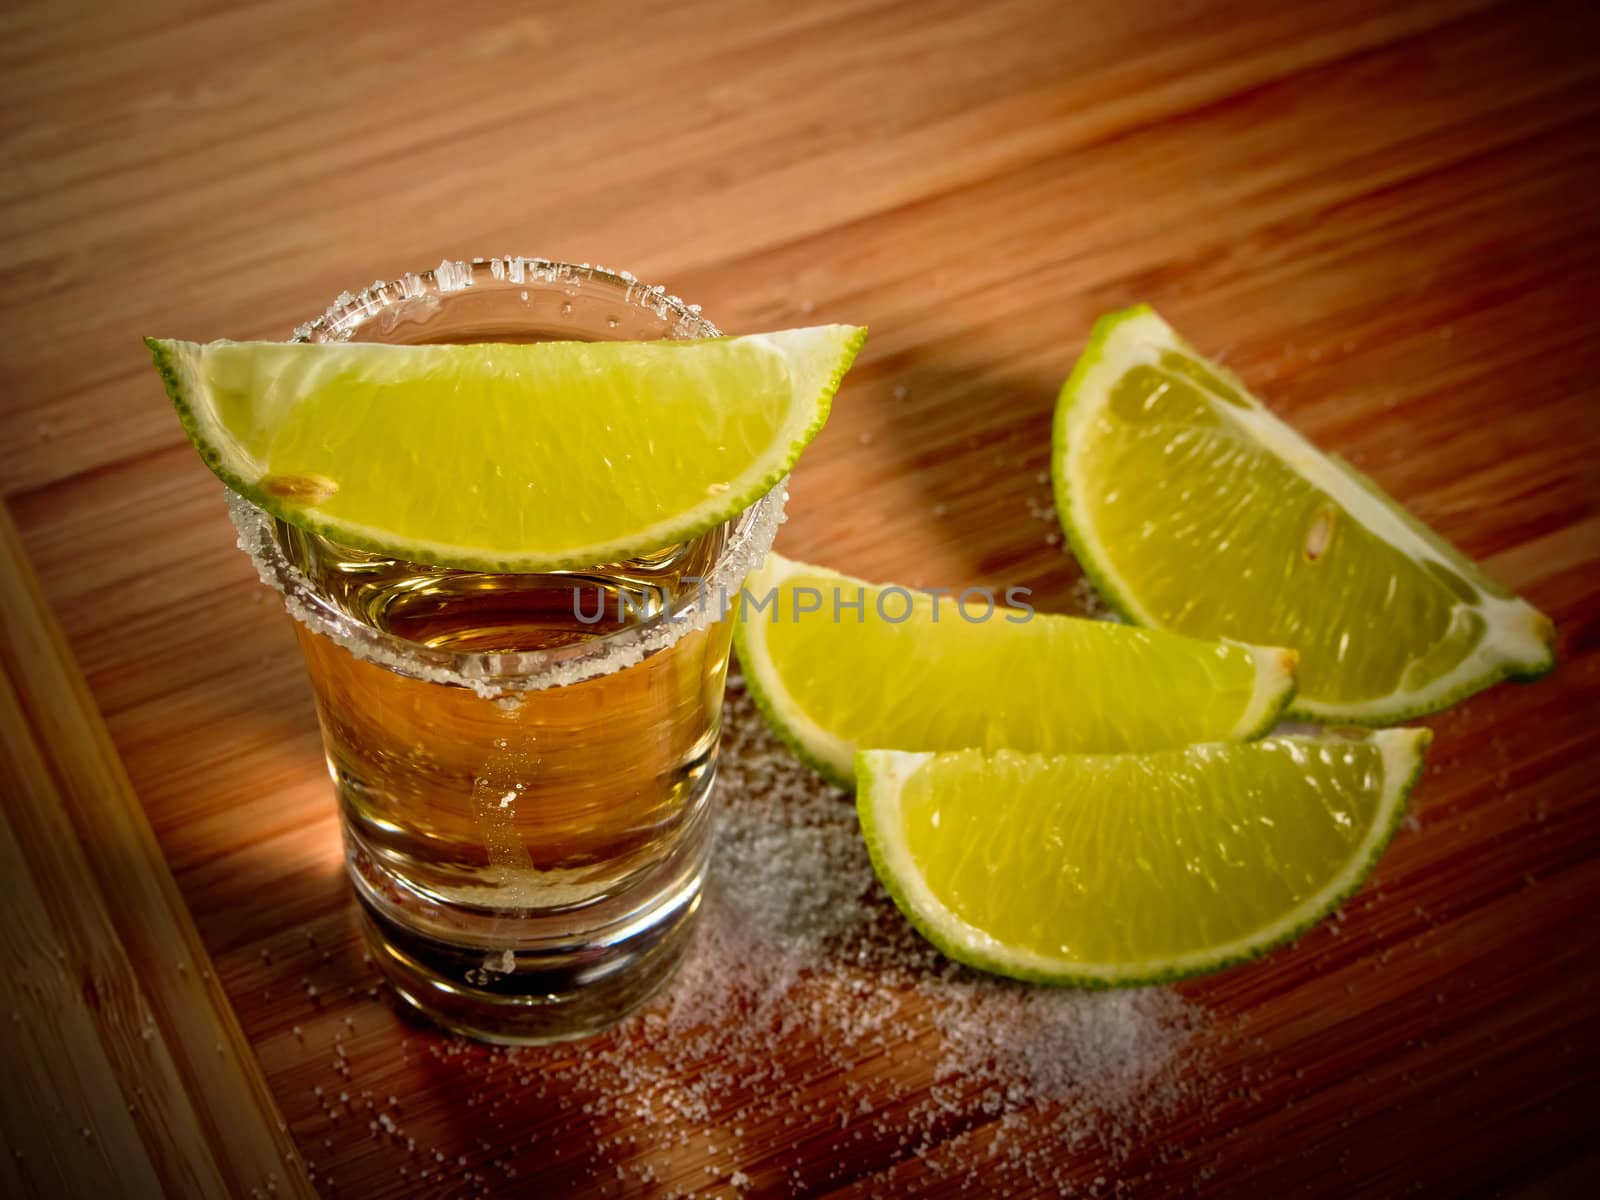 Tequila shot with salt rim and lime wedges